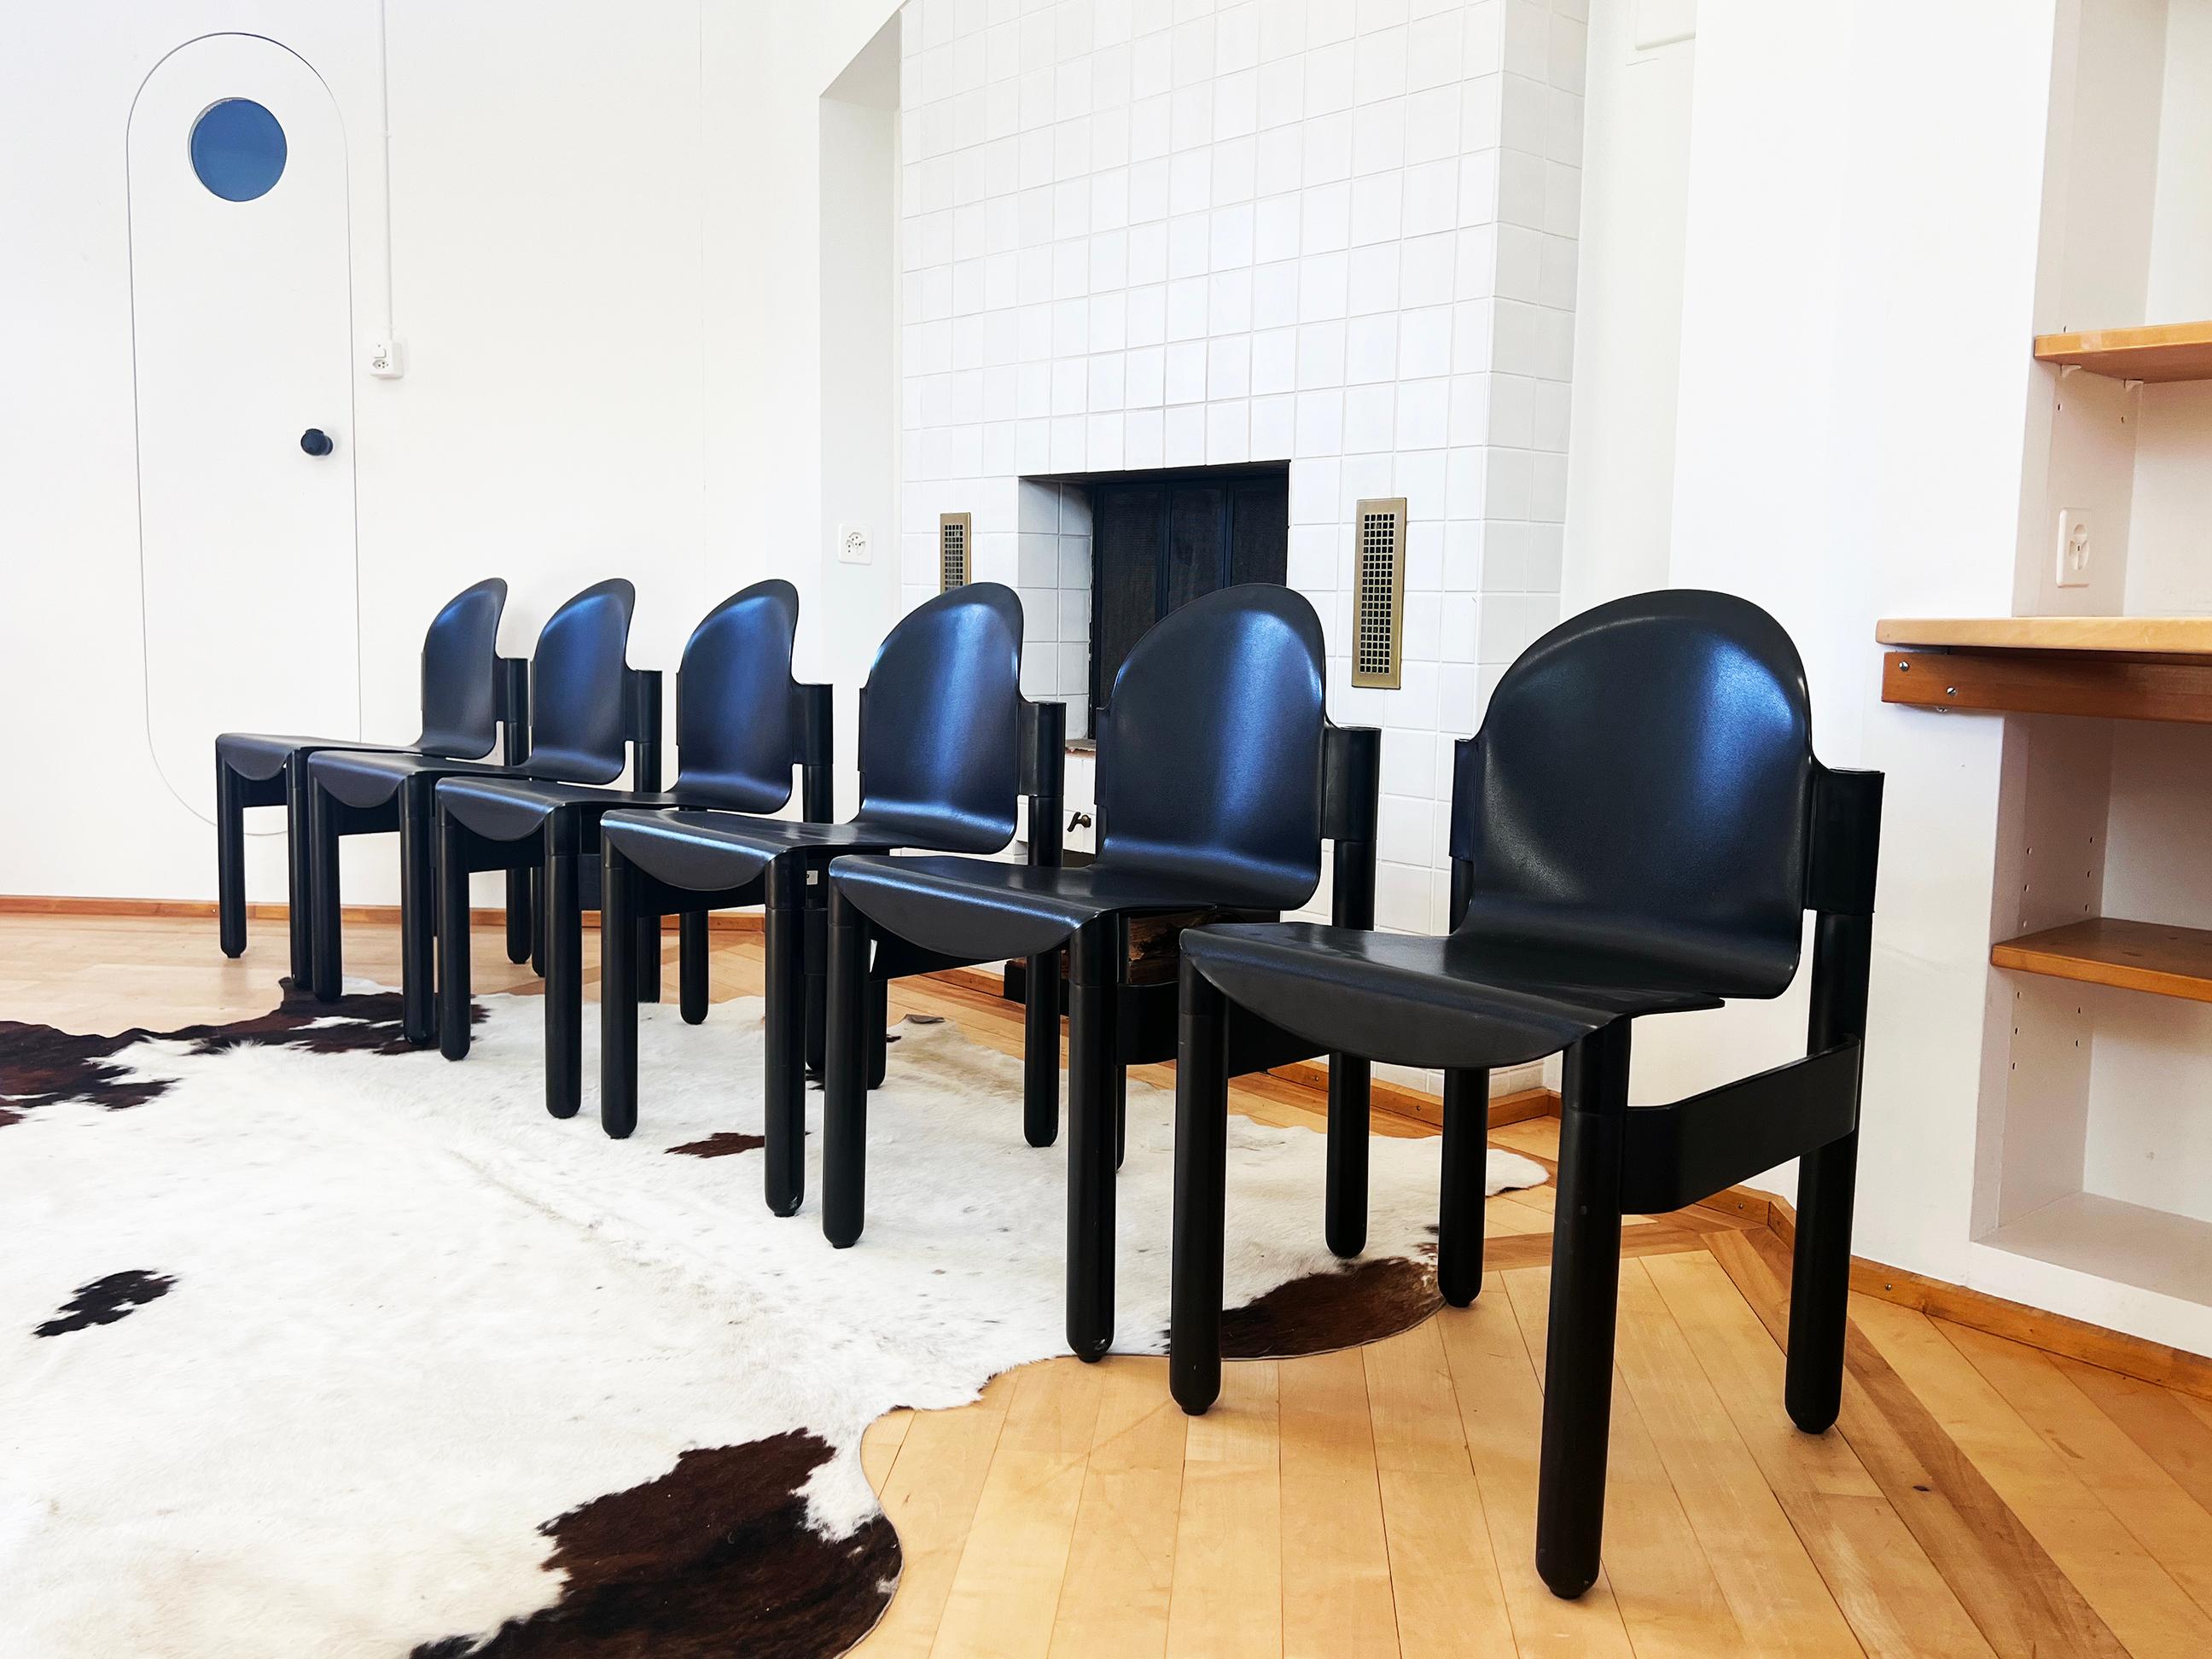 Postmodern 1980s Flex 2000 Stacking Chairs by Gerd Lange for Thonet, Solid Black In Good Condition For Sale In Basel, BS